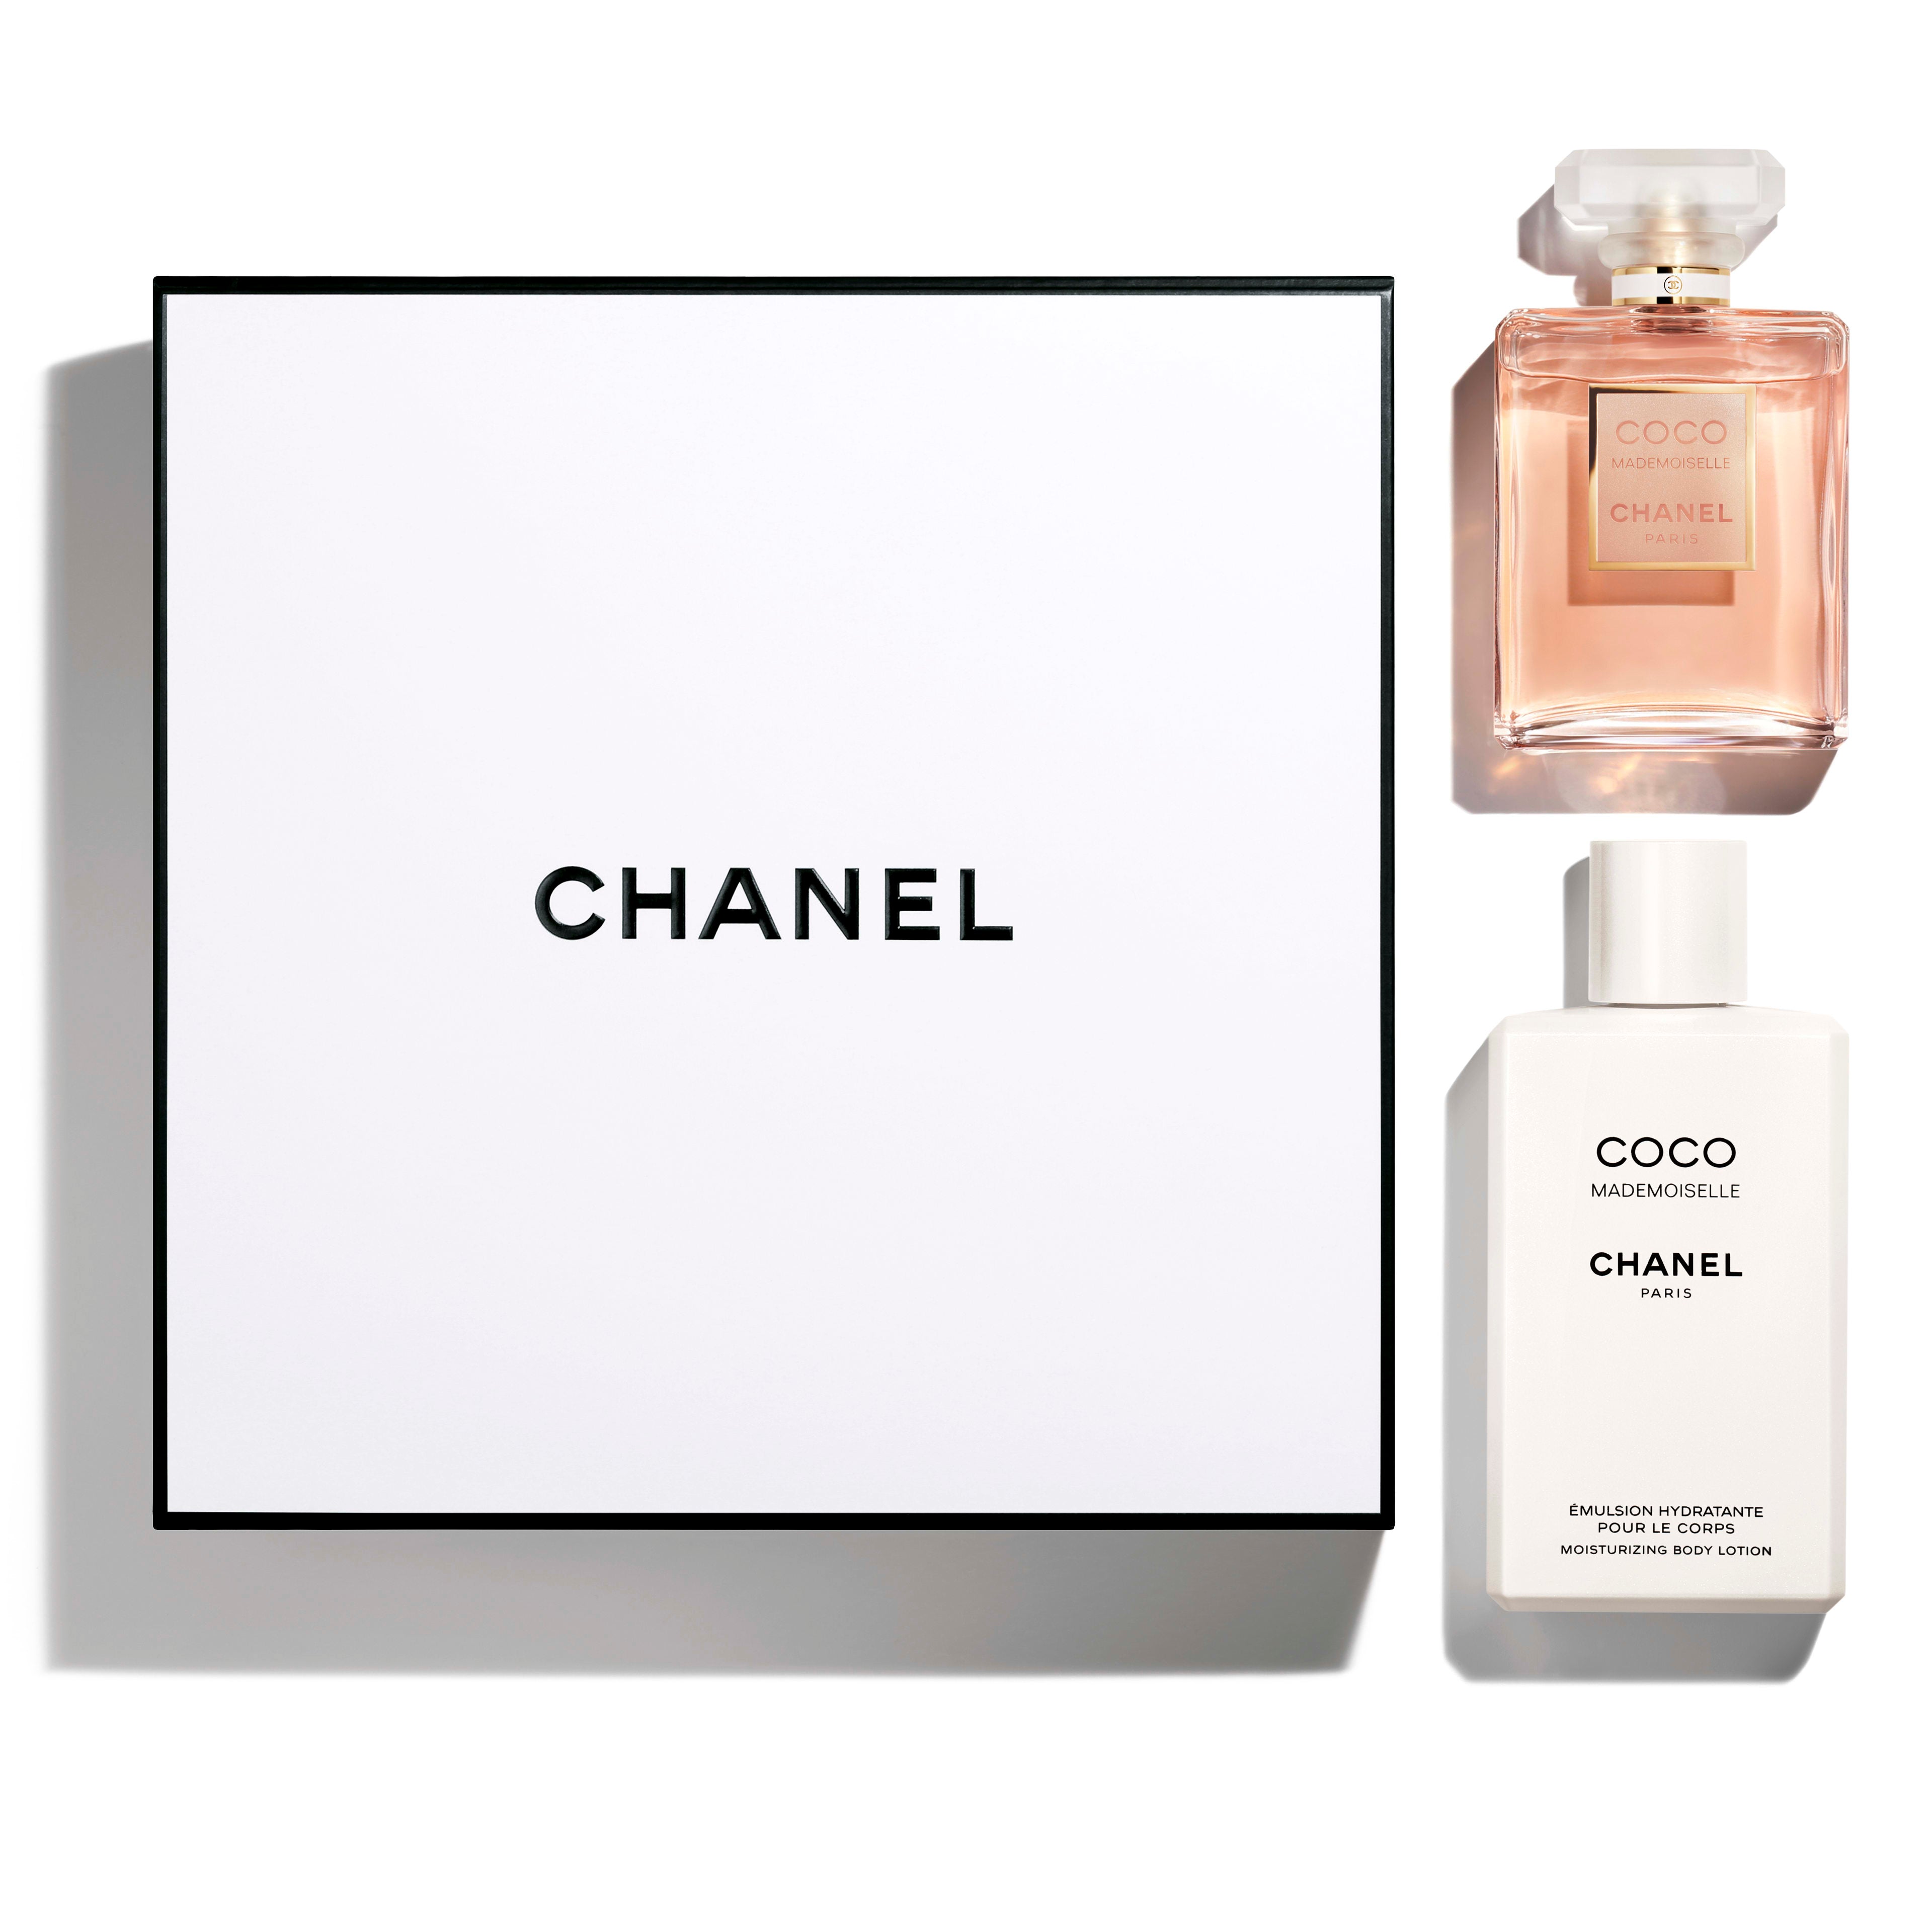 Chanel Coco Mademoiselle - Body Lotion (tester)